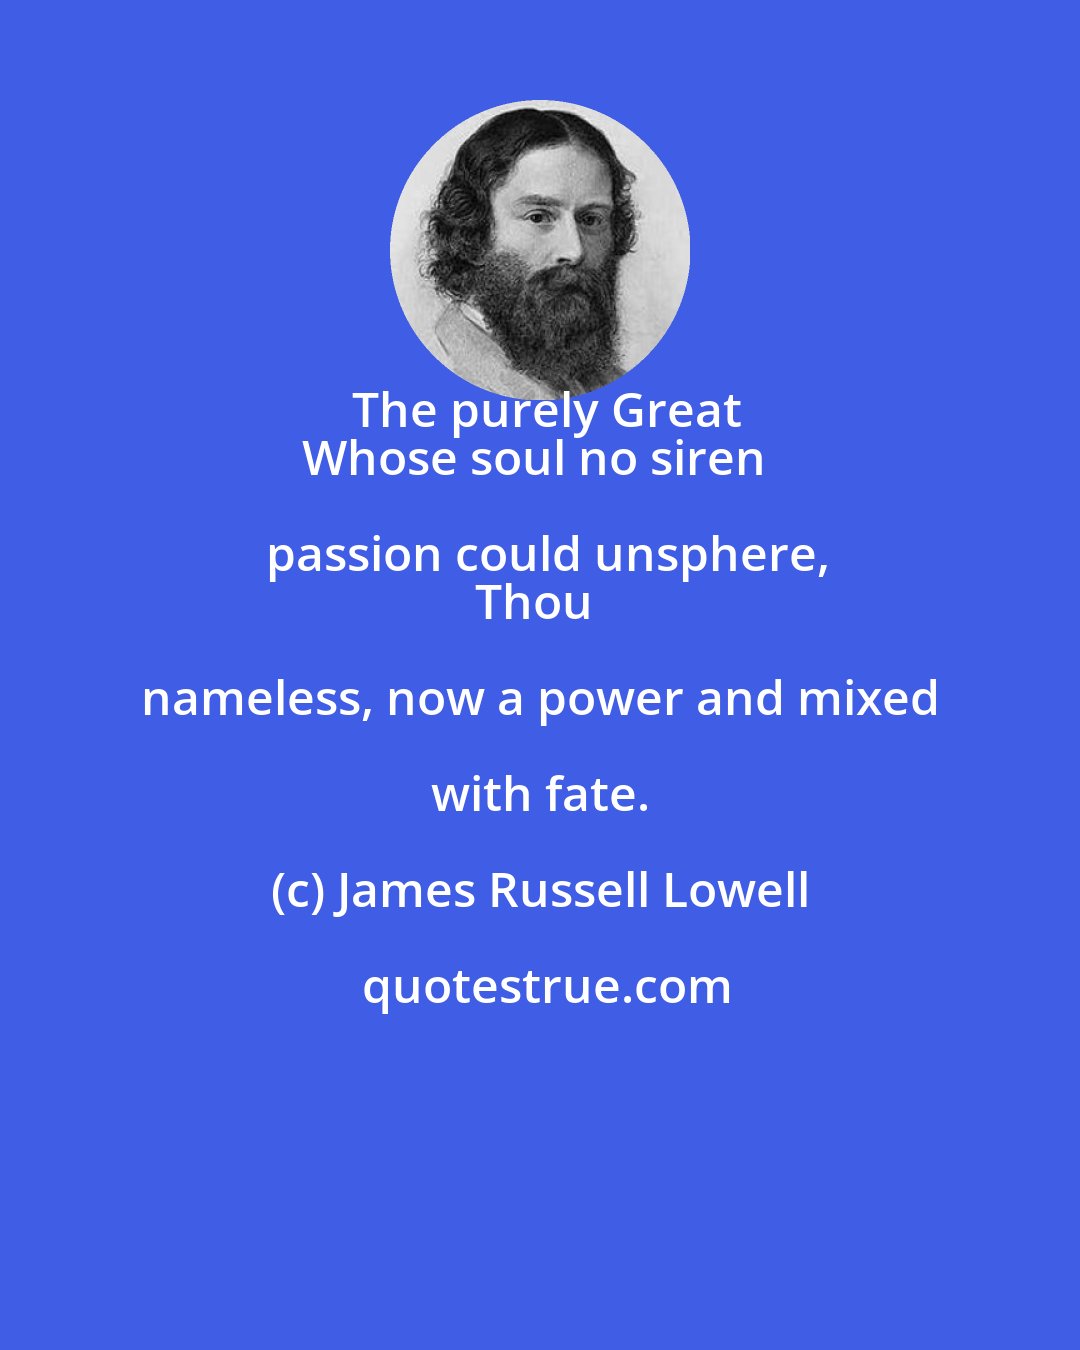 James Russell Lowell: The purely Great
Whose soul no siren passion could unsphere,
Thou nameless, now a power and mixed with fate.